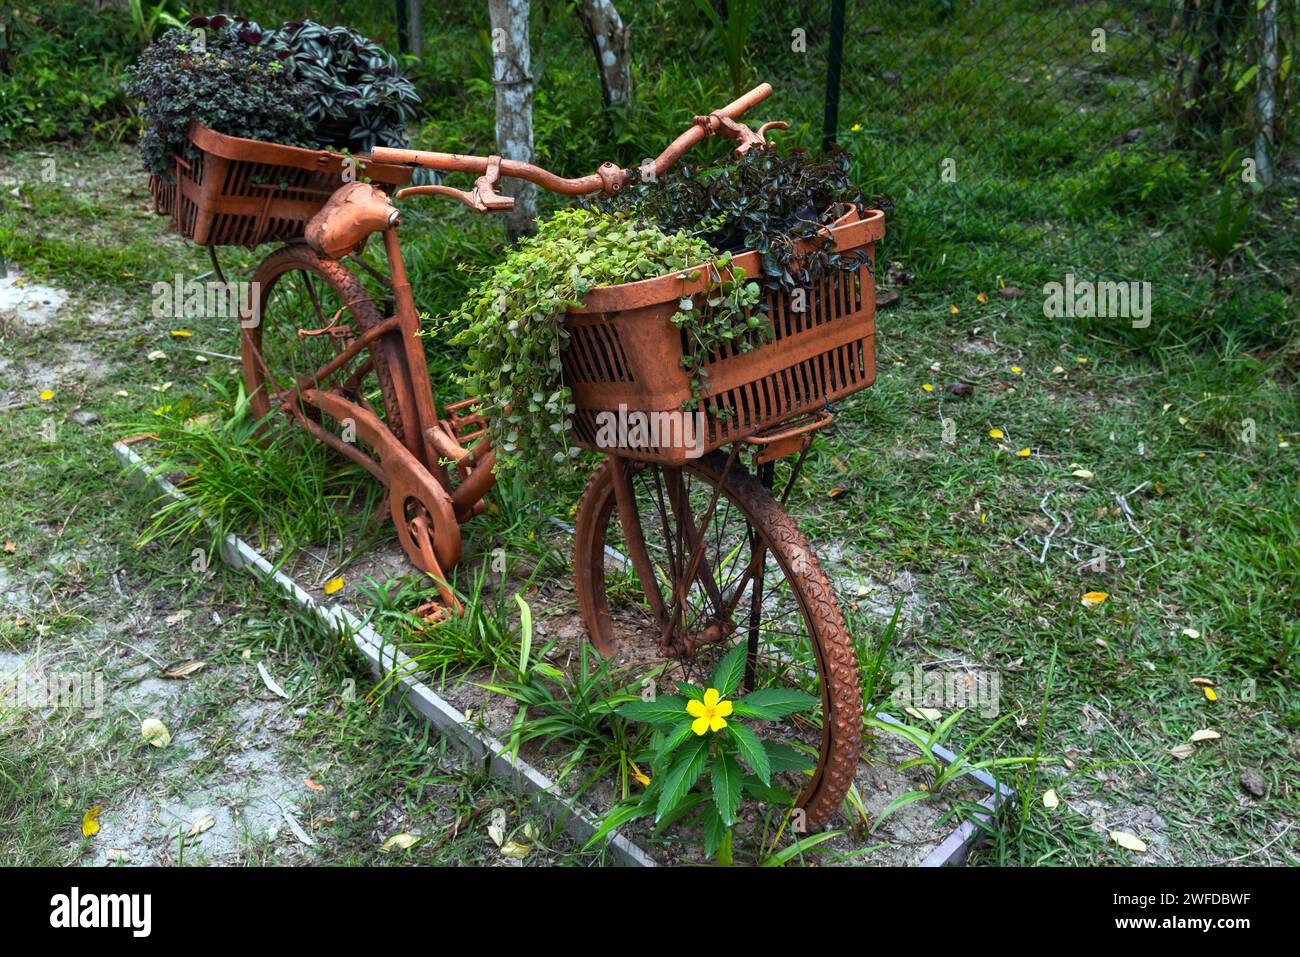 Vintage bicycle with baskes full of potted plants, close up. Park decoration object Stock Photo